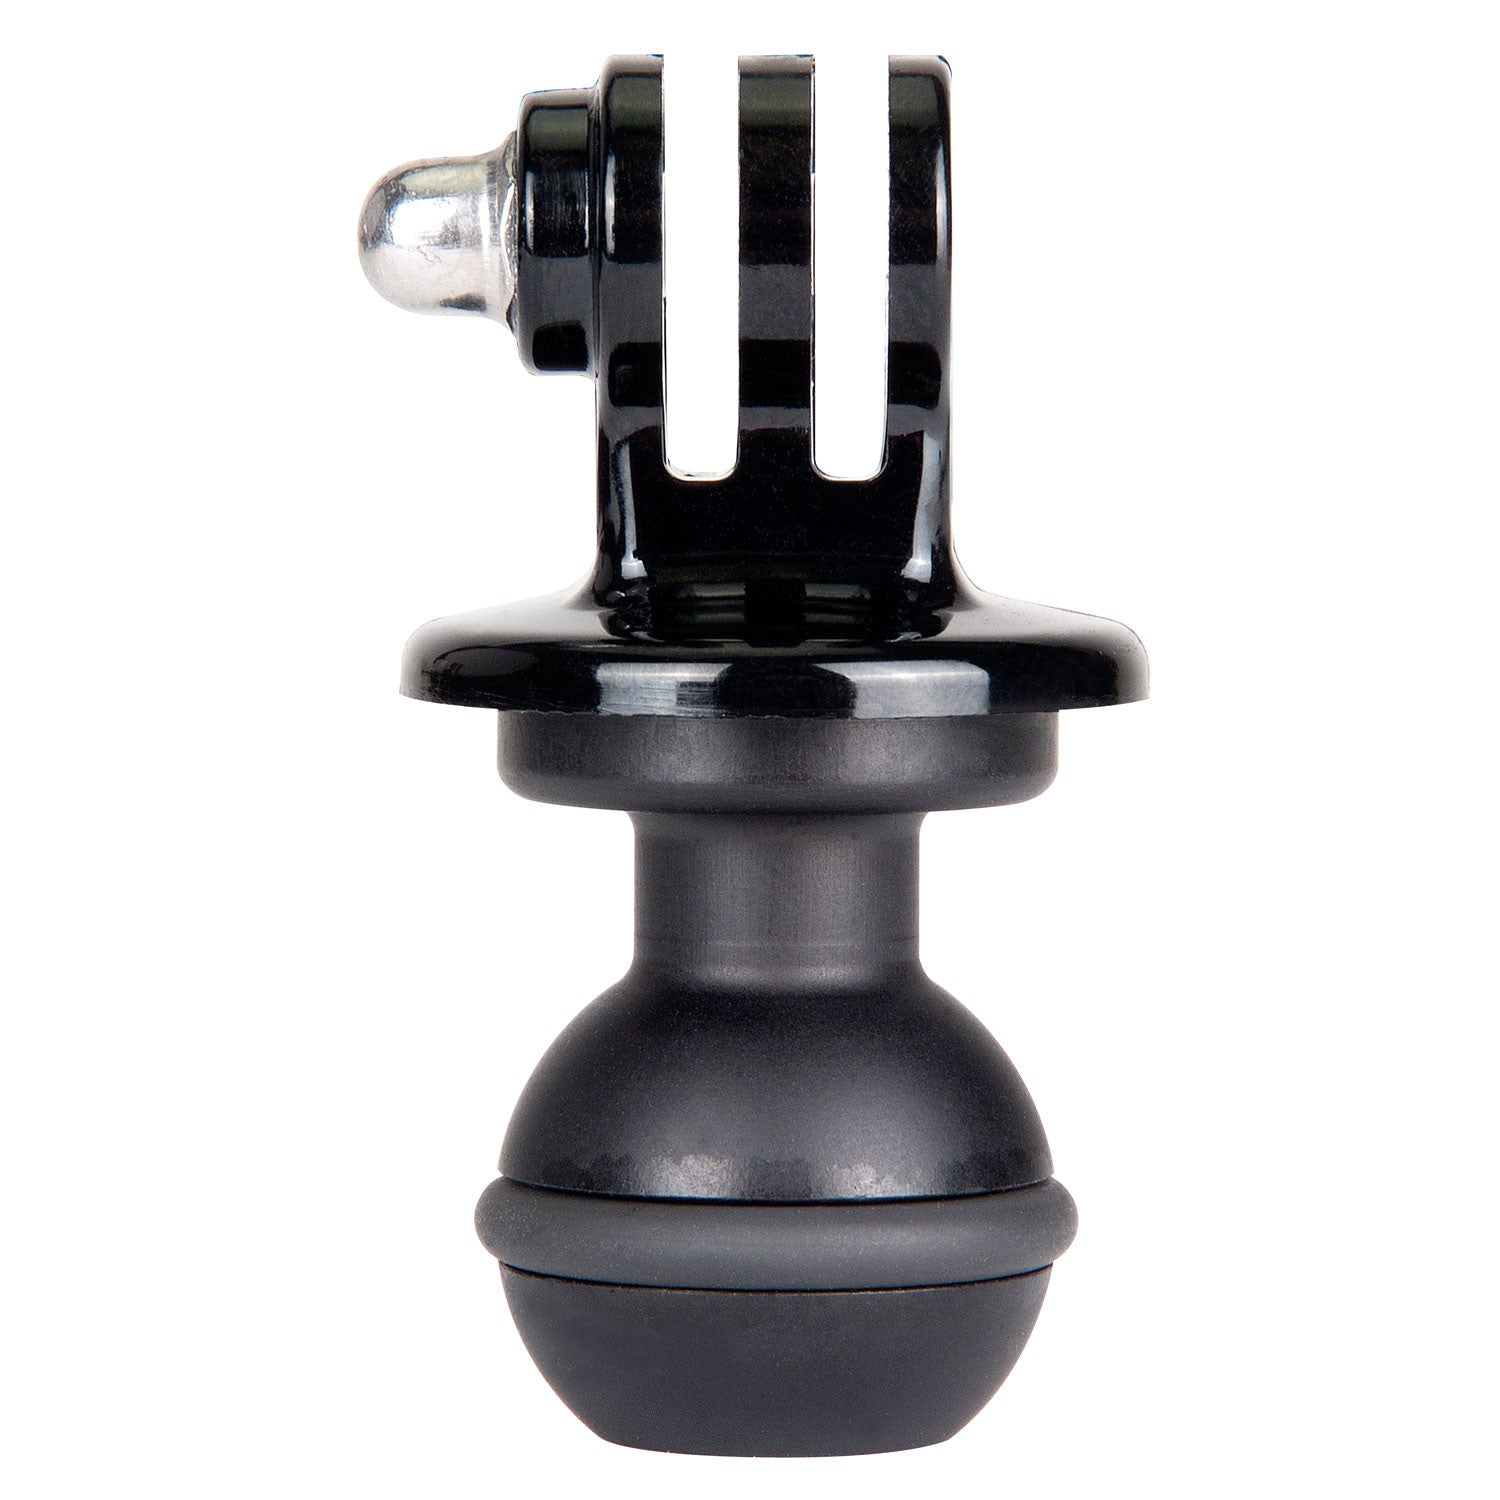 1-inch Ball Mount for GoPro